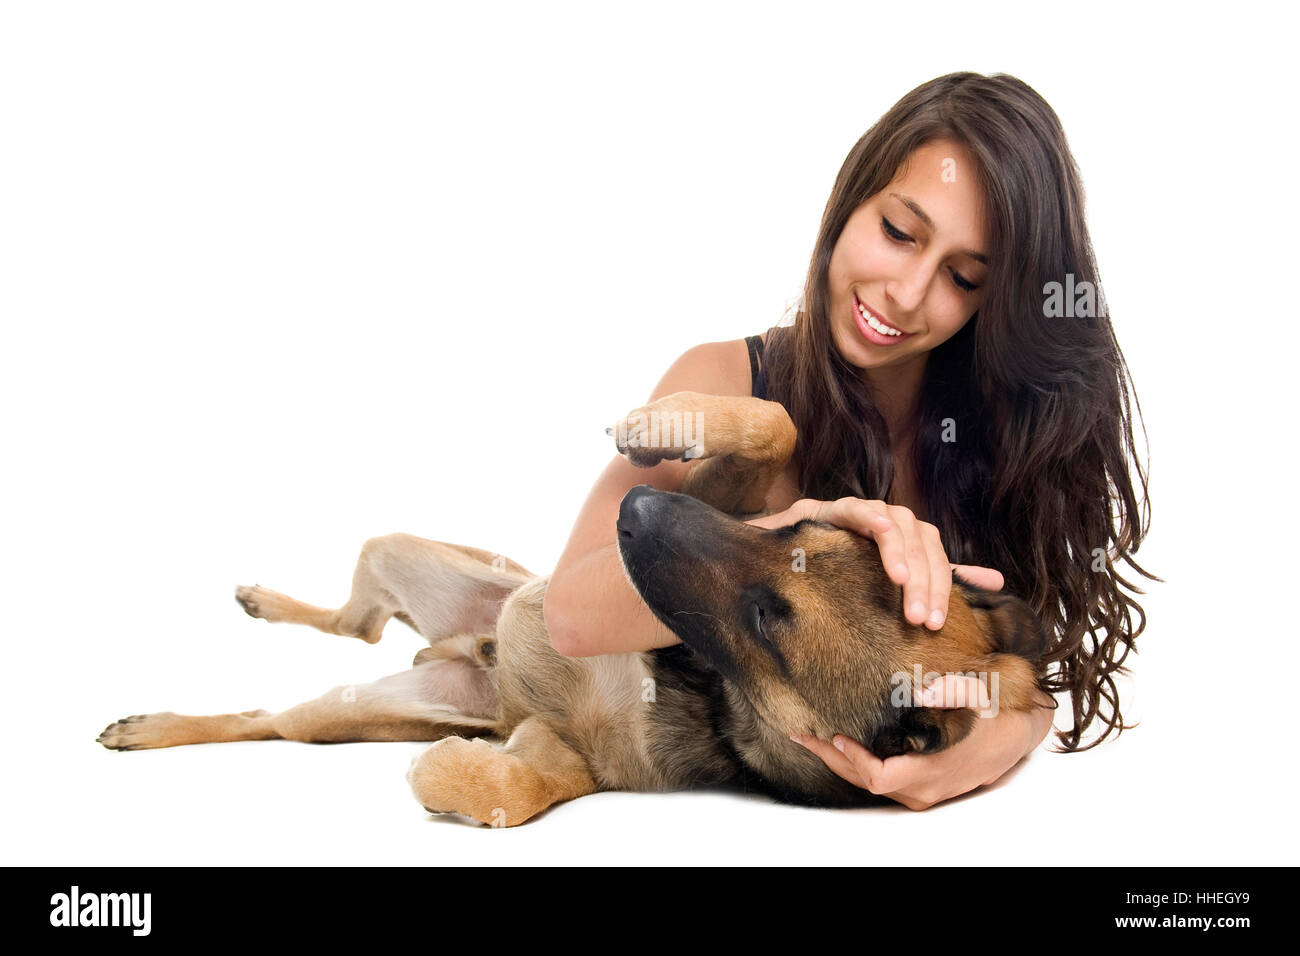 woman, dog, owner, girl, girls, laugh, laughs, laughing, twit, giggle, smile, Stock Photo